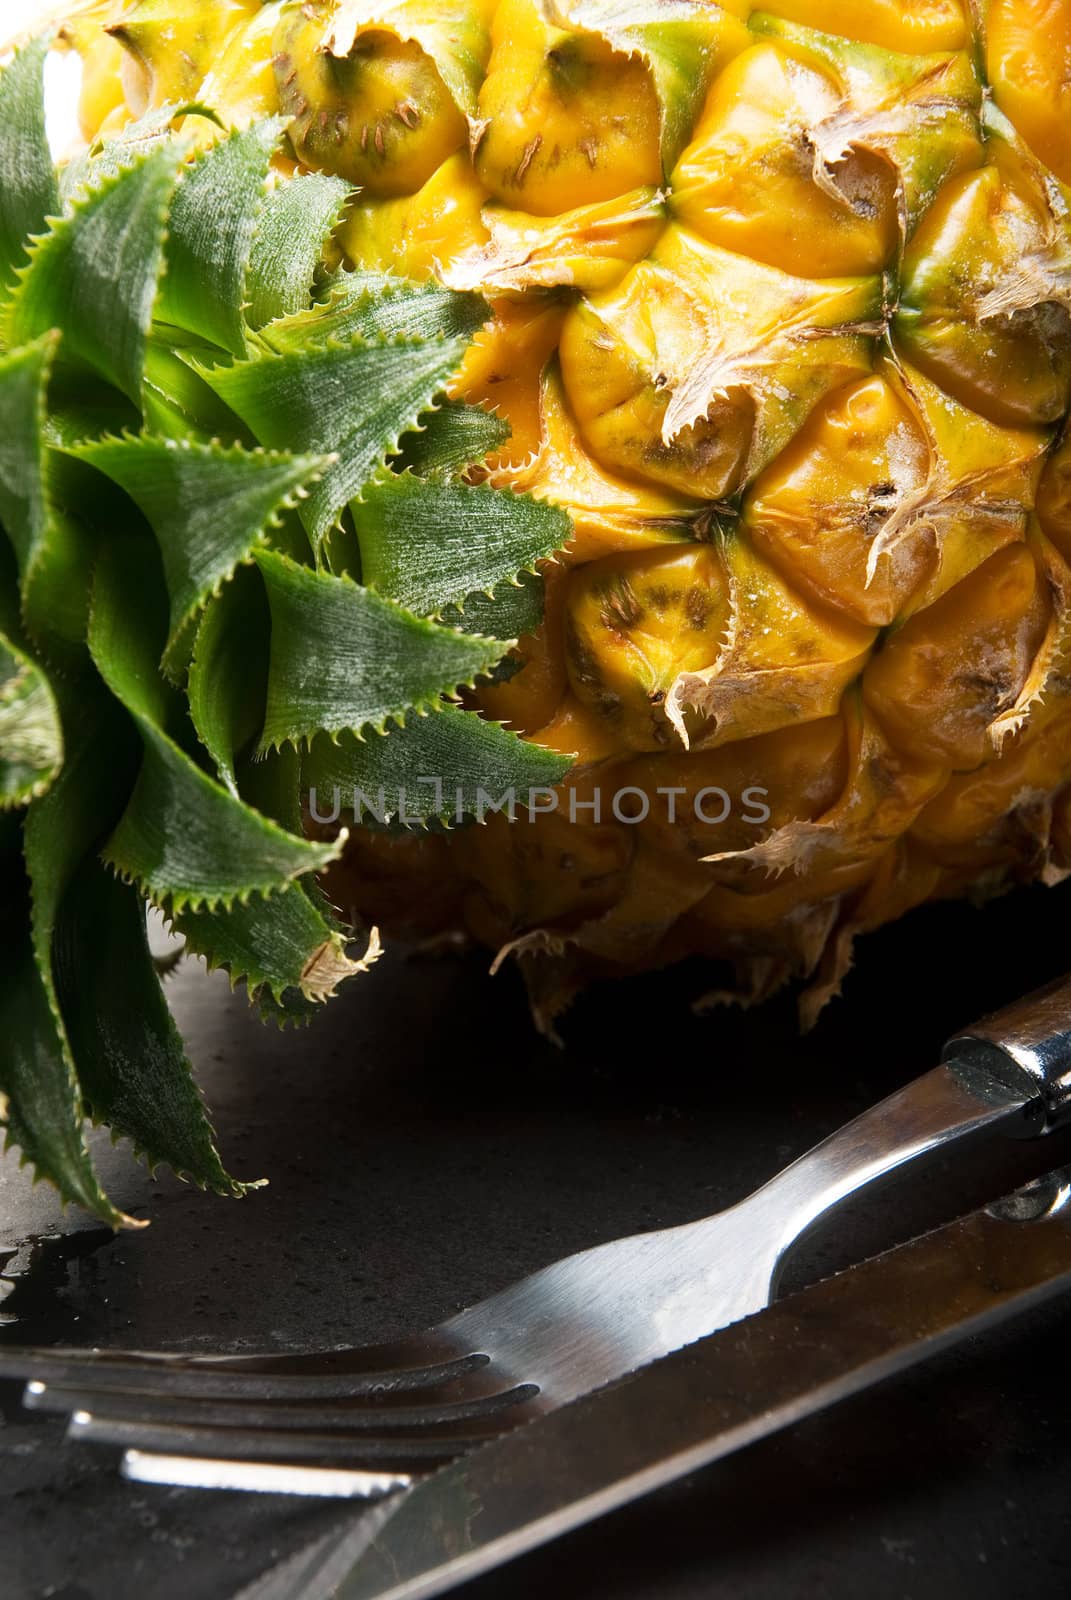 ripe pineapple on a black plate with knife and fork